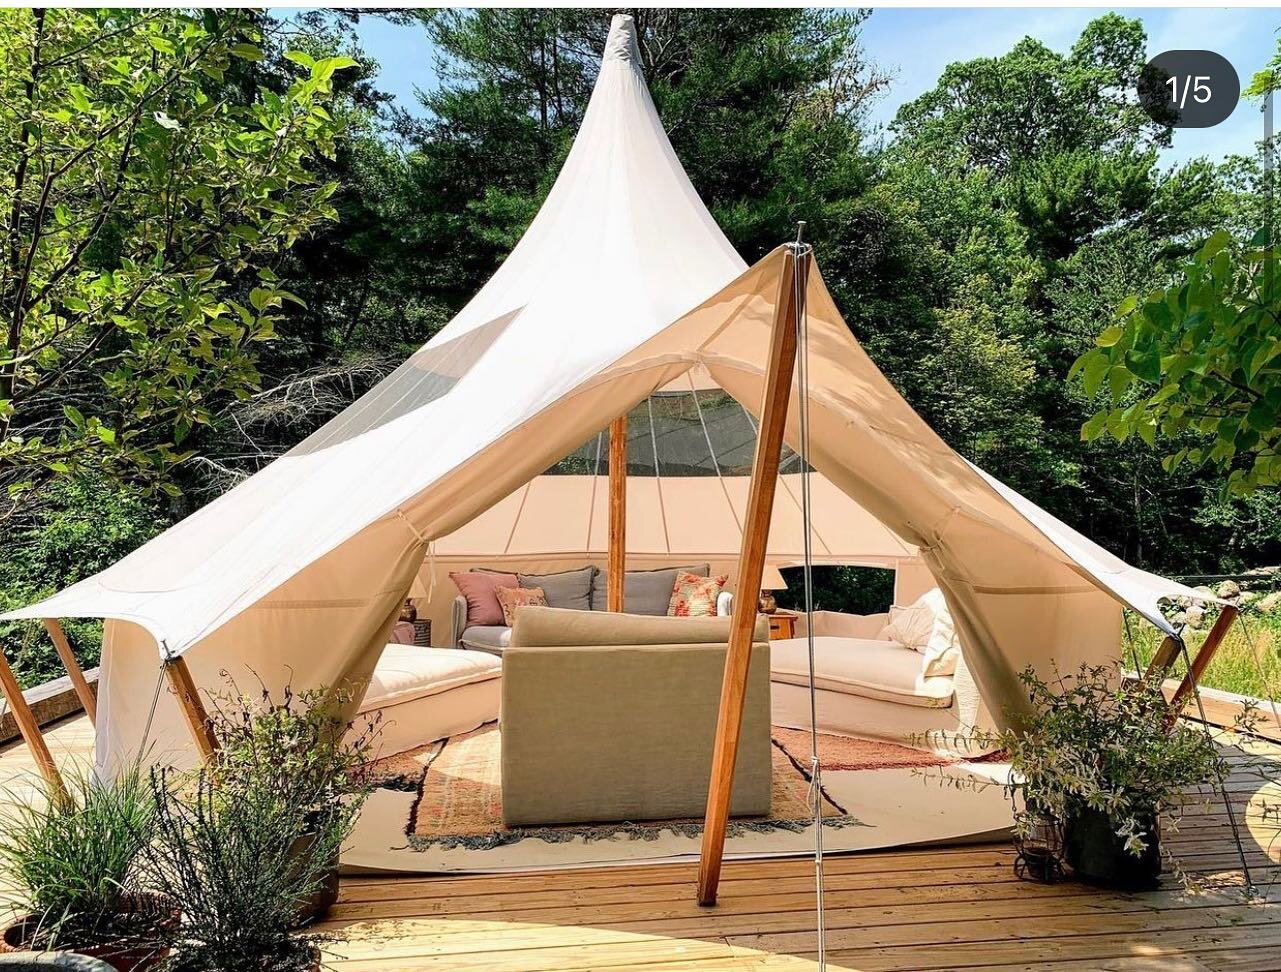 Sperry TeePee  a great and fun tent for your lounge area

#sperryteepee #destinationwedding #mauiwedding #destinationwedding #hawaiiwedding #weddingideas